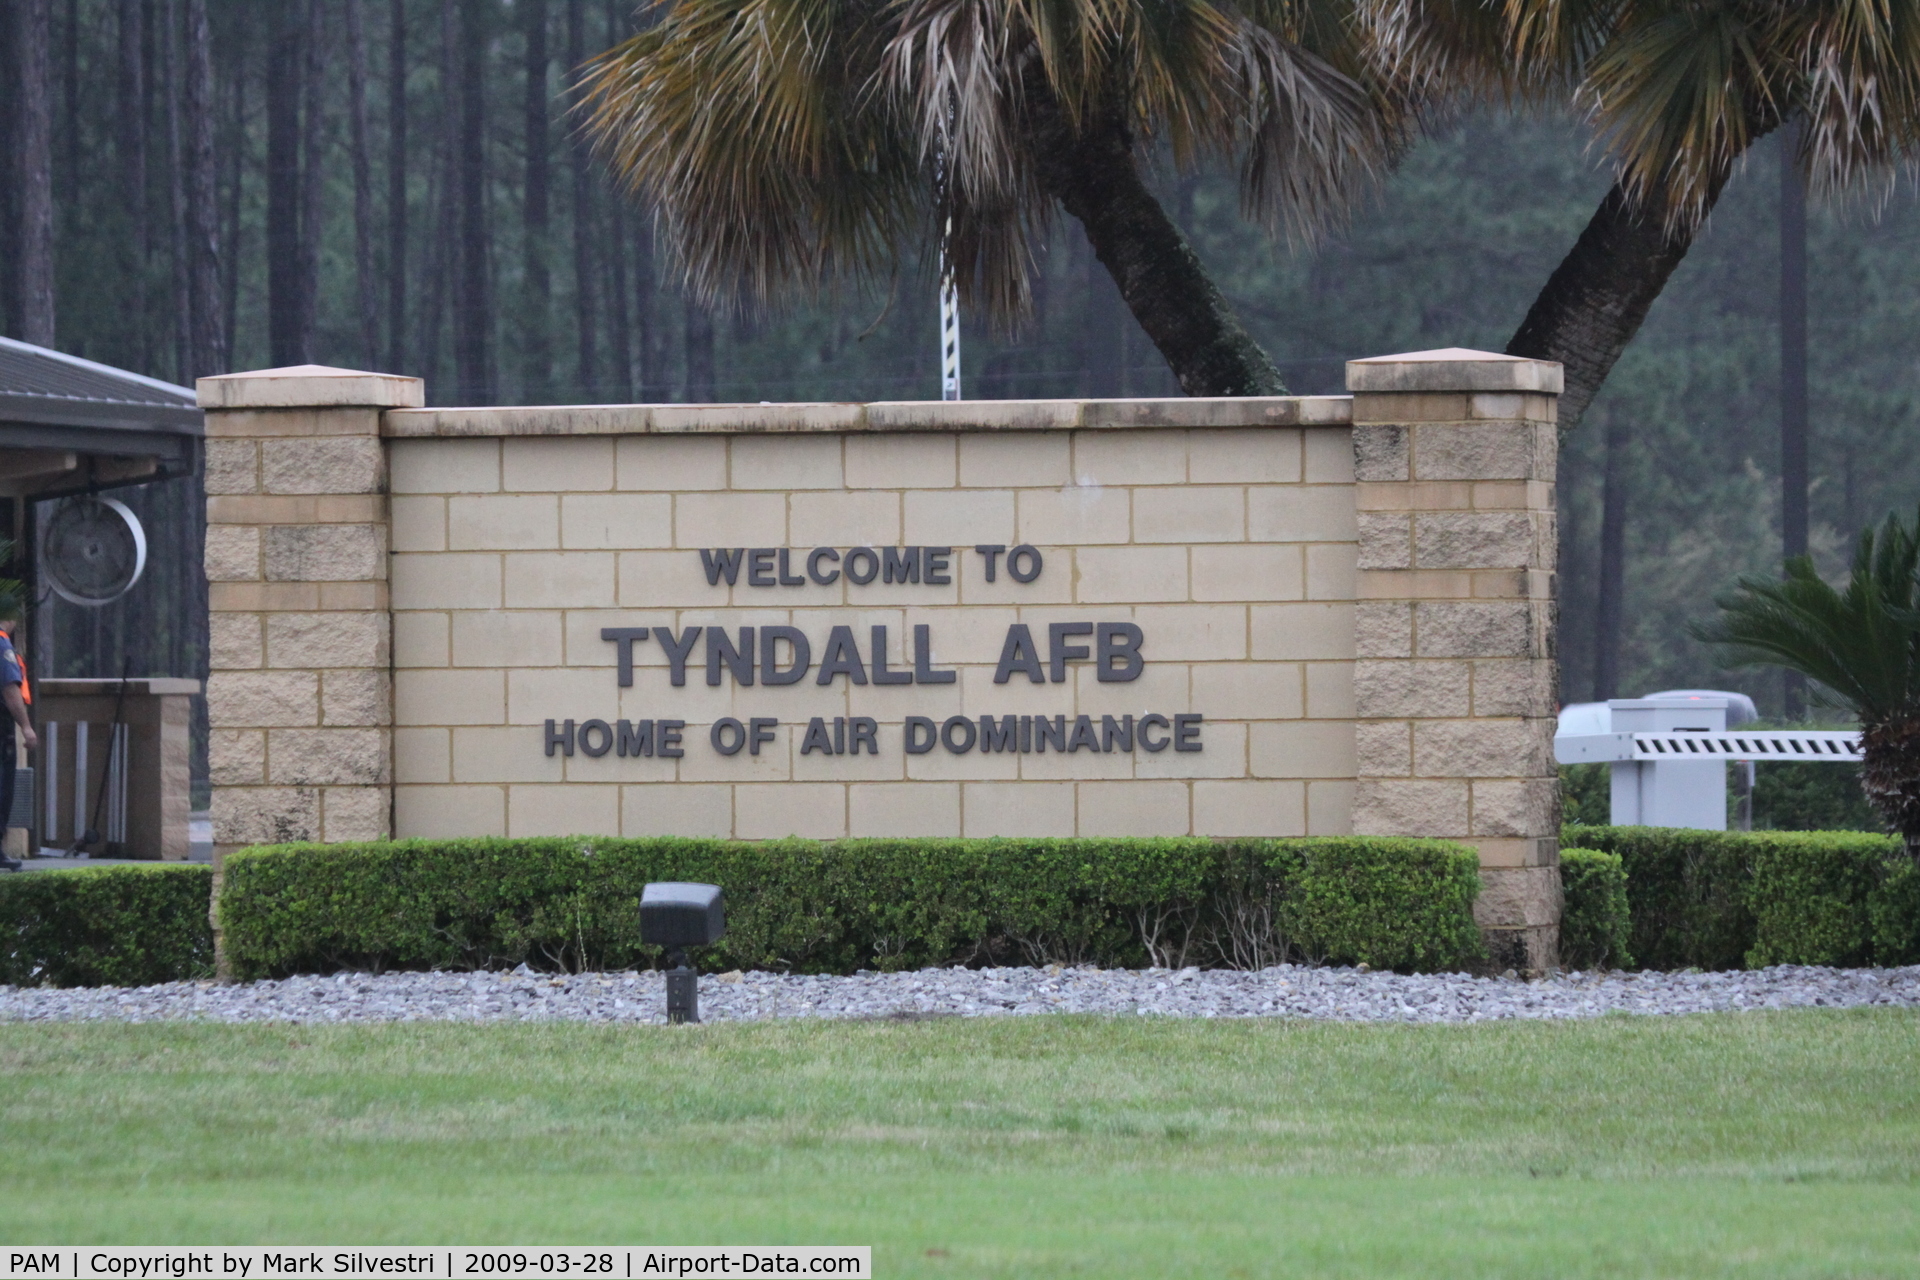 Tyndall Afb Airport (PAM) - Entrance to Tyndall AFB